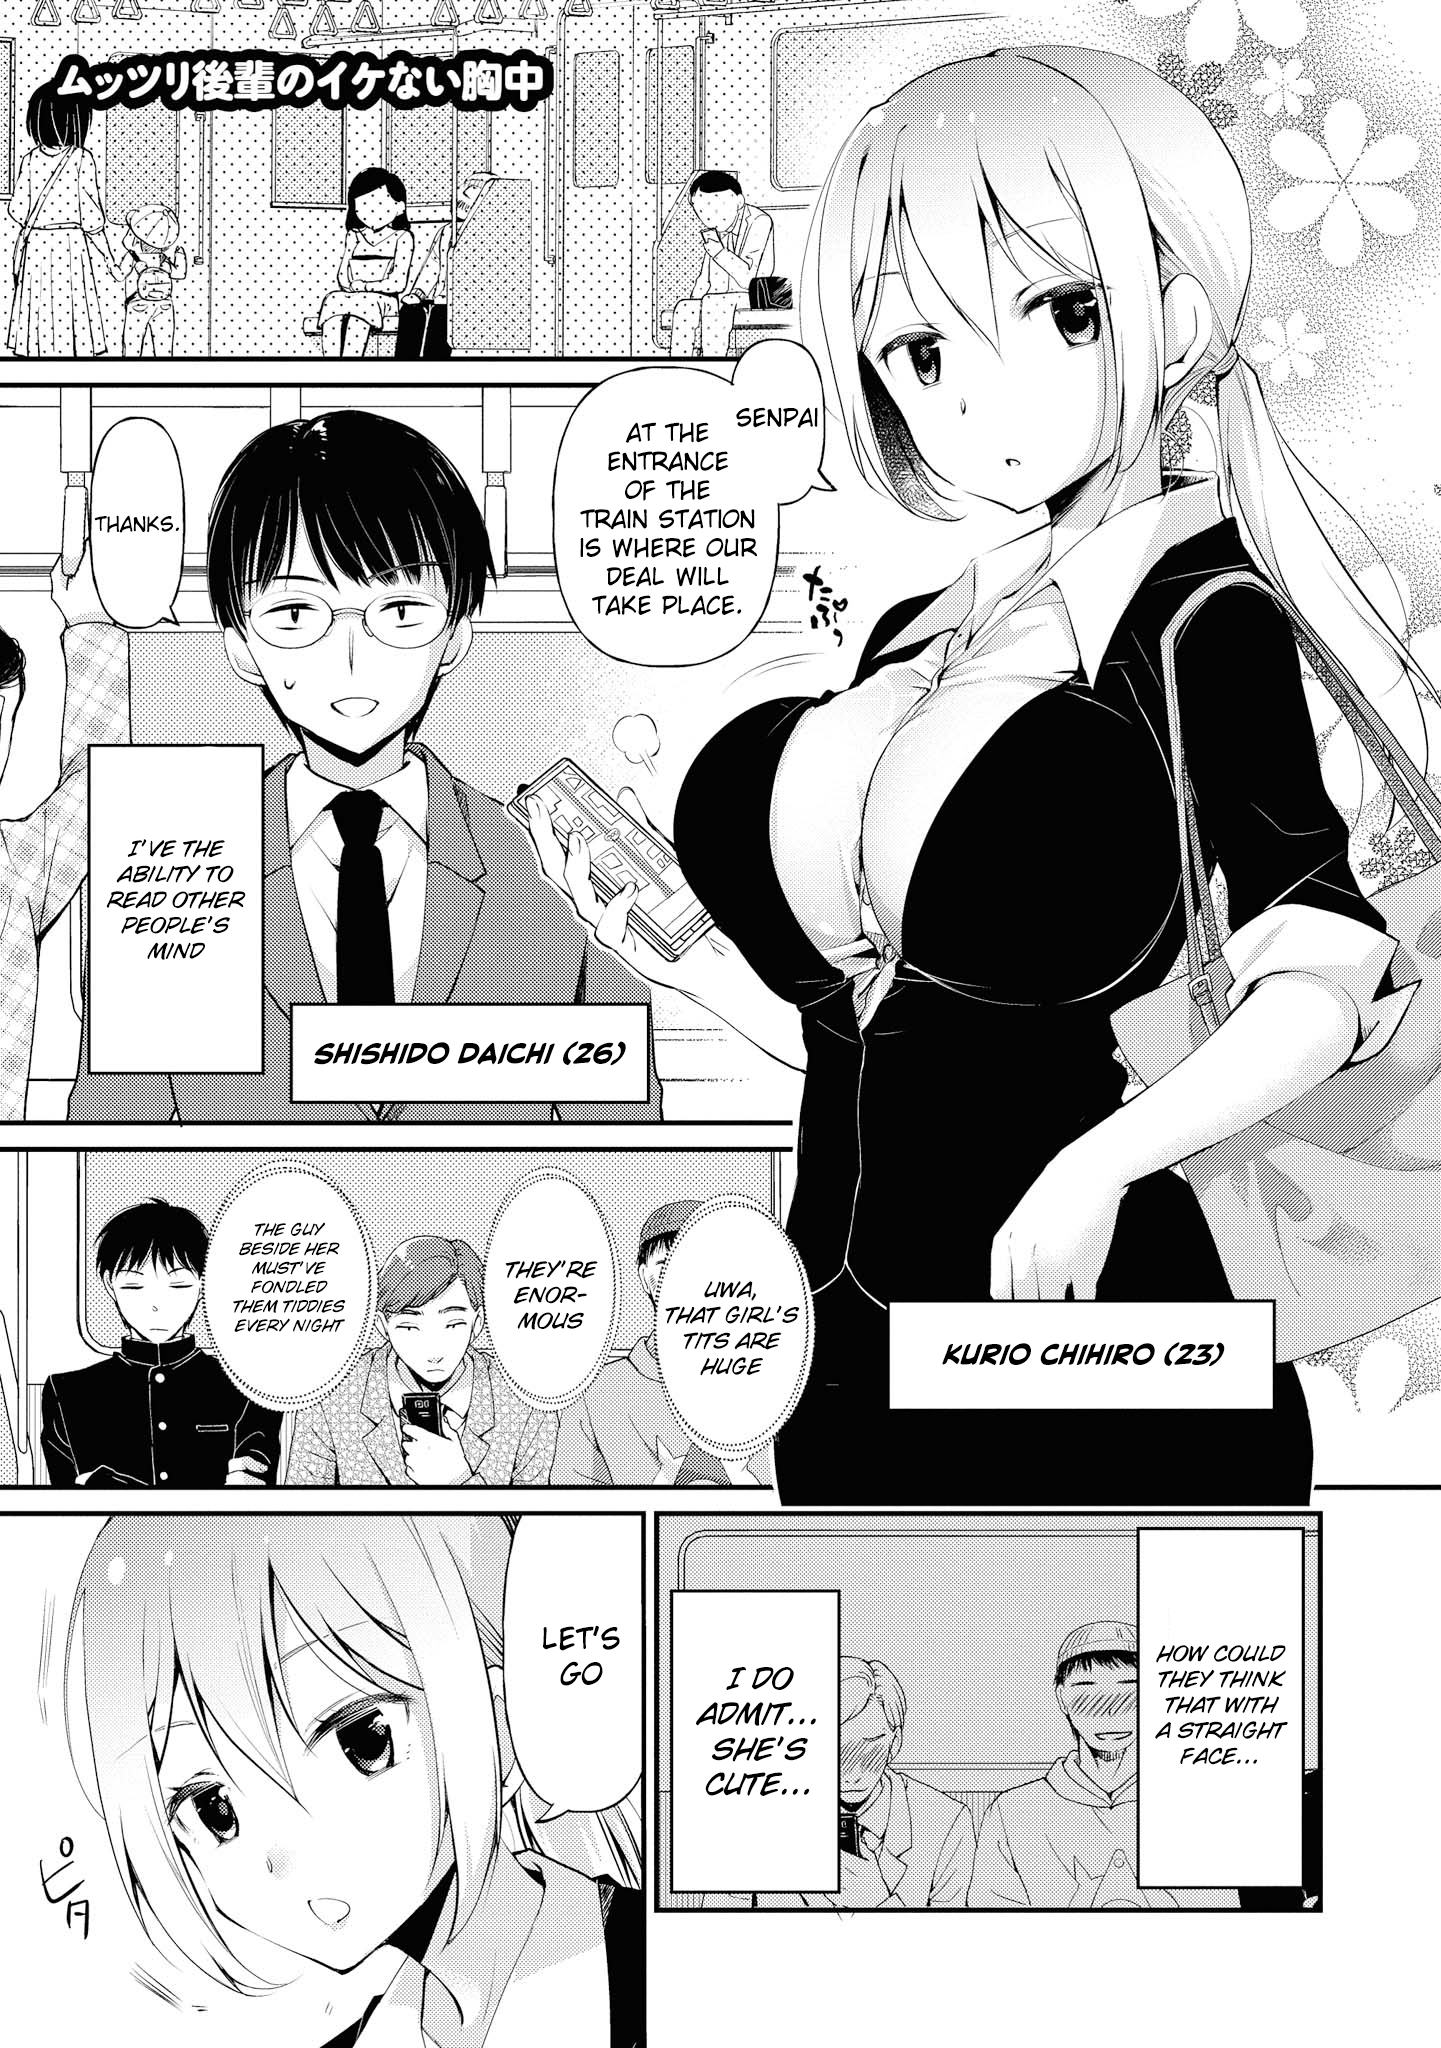 Do You Like Fluffy Boobs? Busty Girl Anthology Comic Vol.7 Chapter 52: A Closet Pervert Kouhai And Their Perverted Mind And Heart - Picture 2